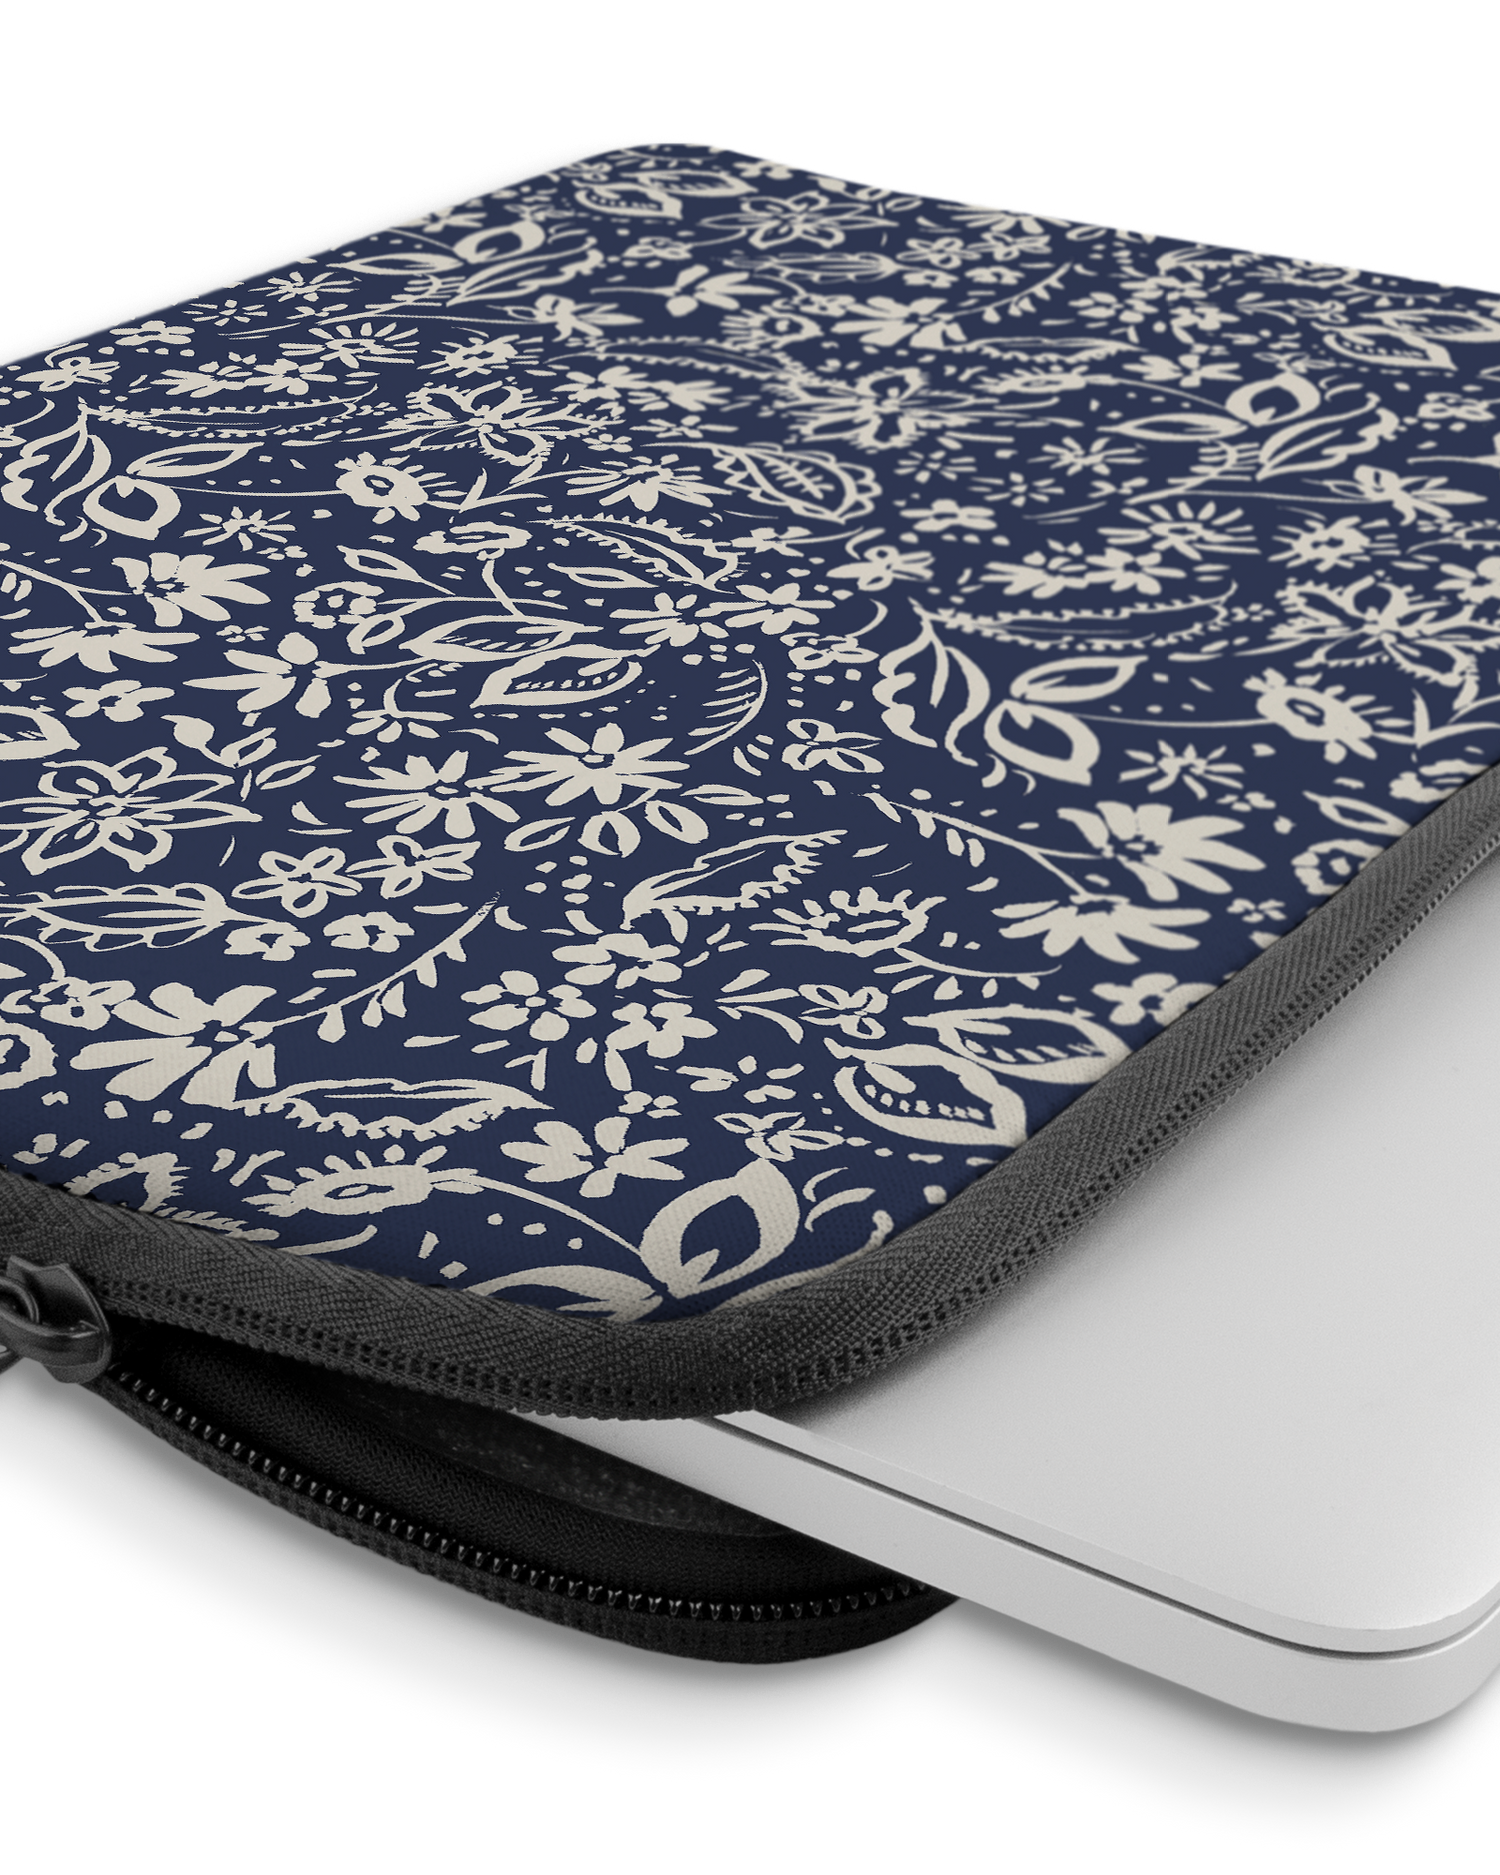 Ditsy Blue Paisley Laptop Case 13-14 inch with device inside